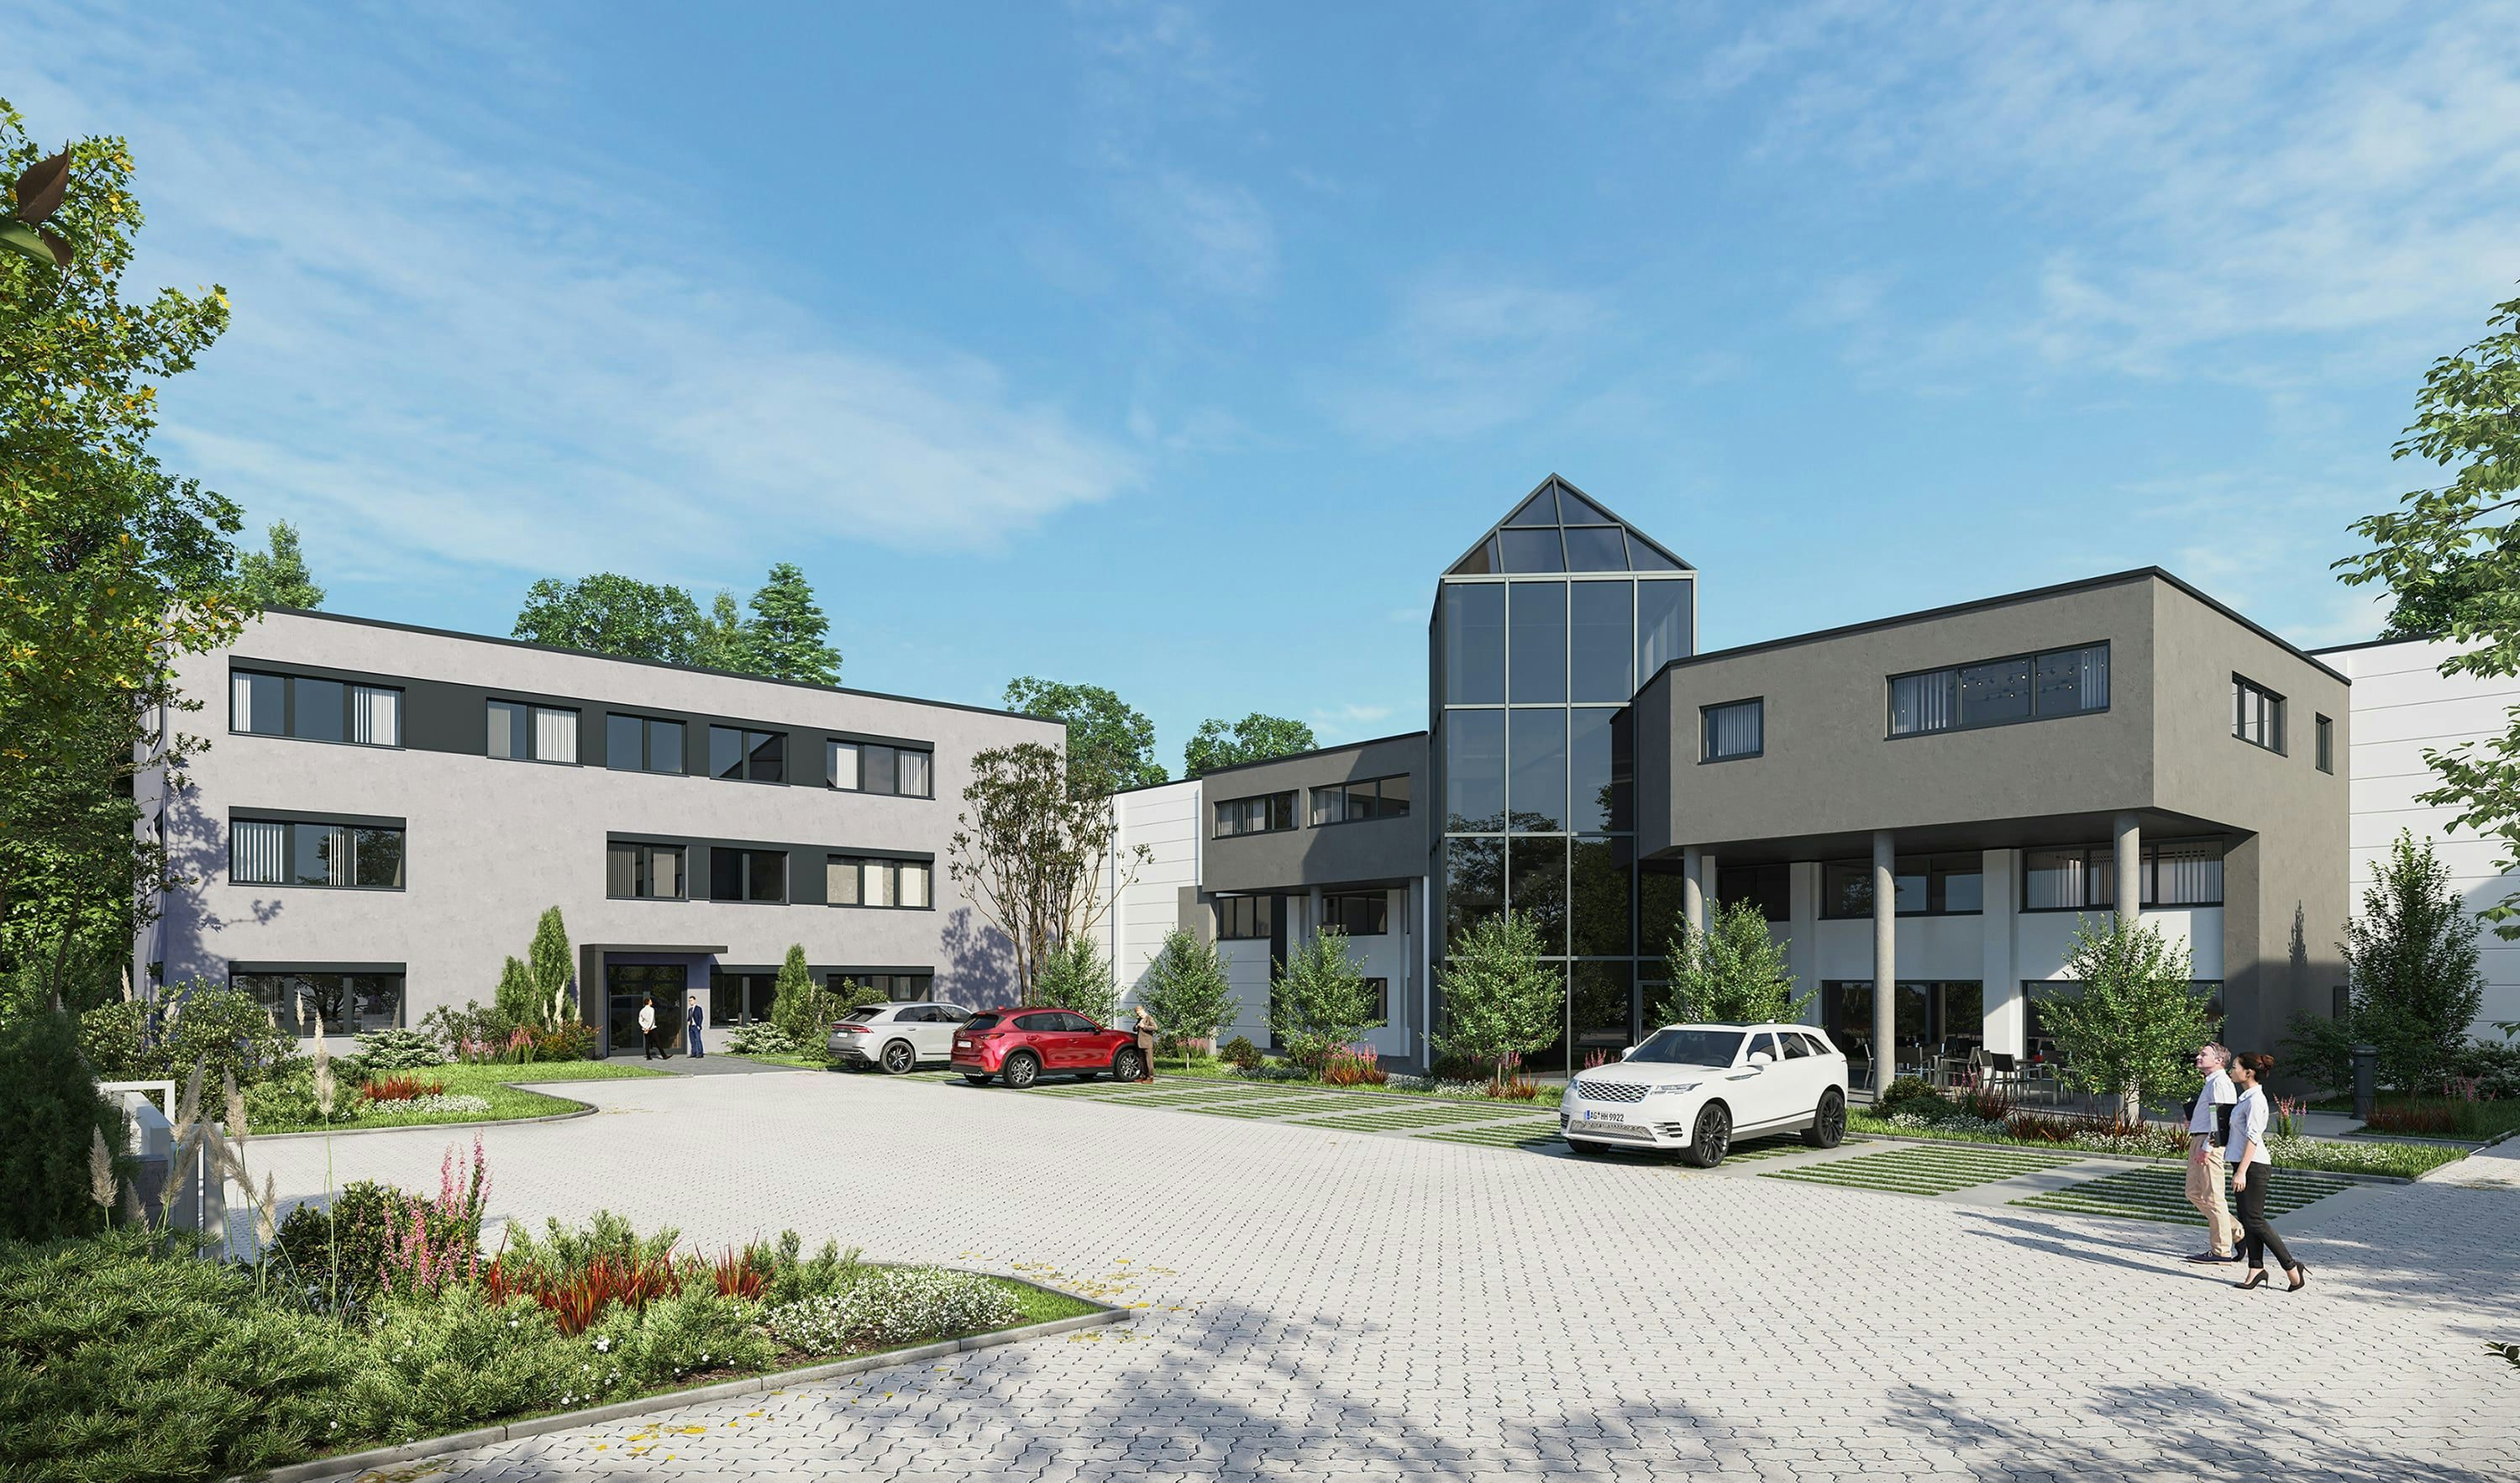 3D architectural visualization of renovation of the office building with multiple storage facilities in Lemgo, Germany